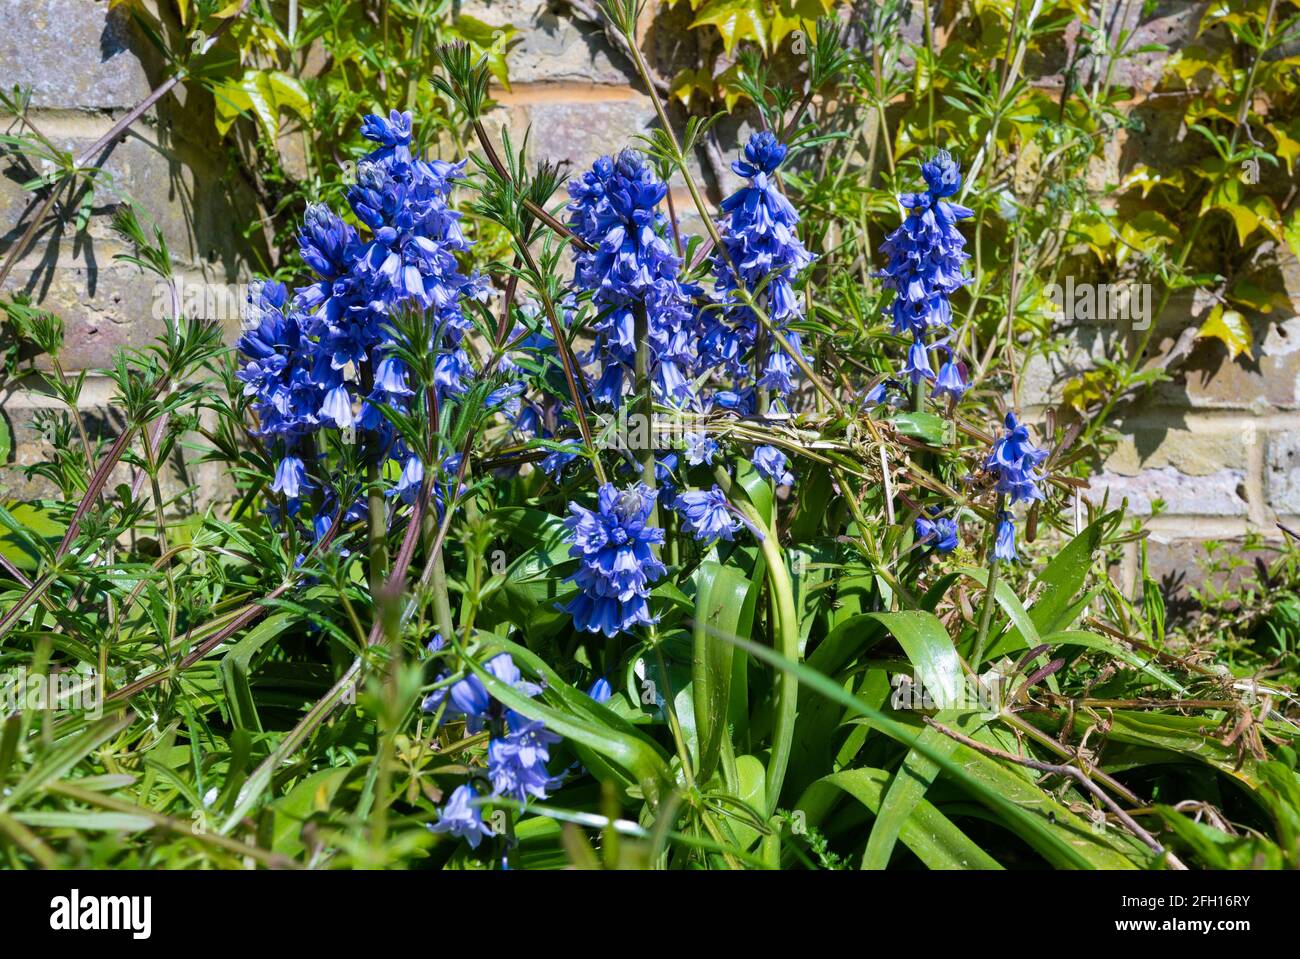 A small clump of Spanish Bluebells (Hyacinthoides hispanica) growing in a park in Spring (mid April) in West Sussex, England, UK. Stock Photo